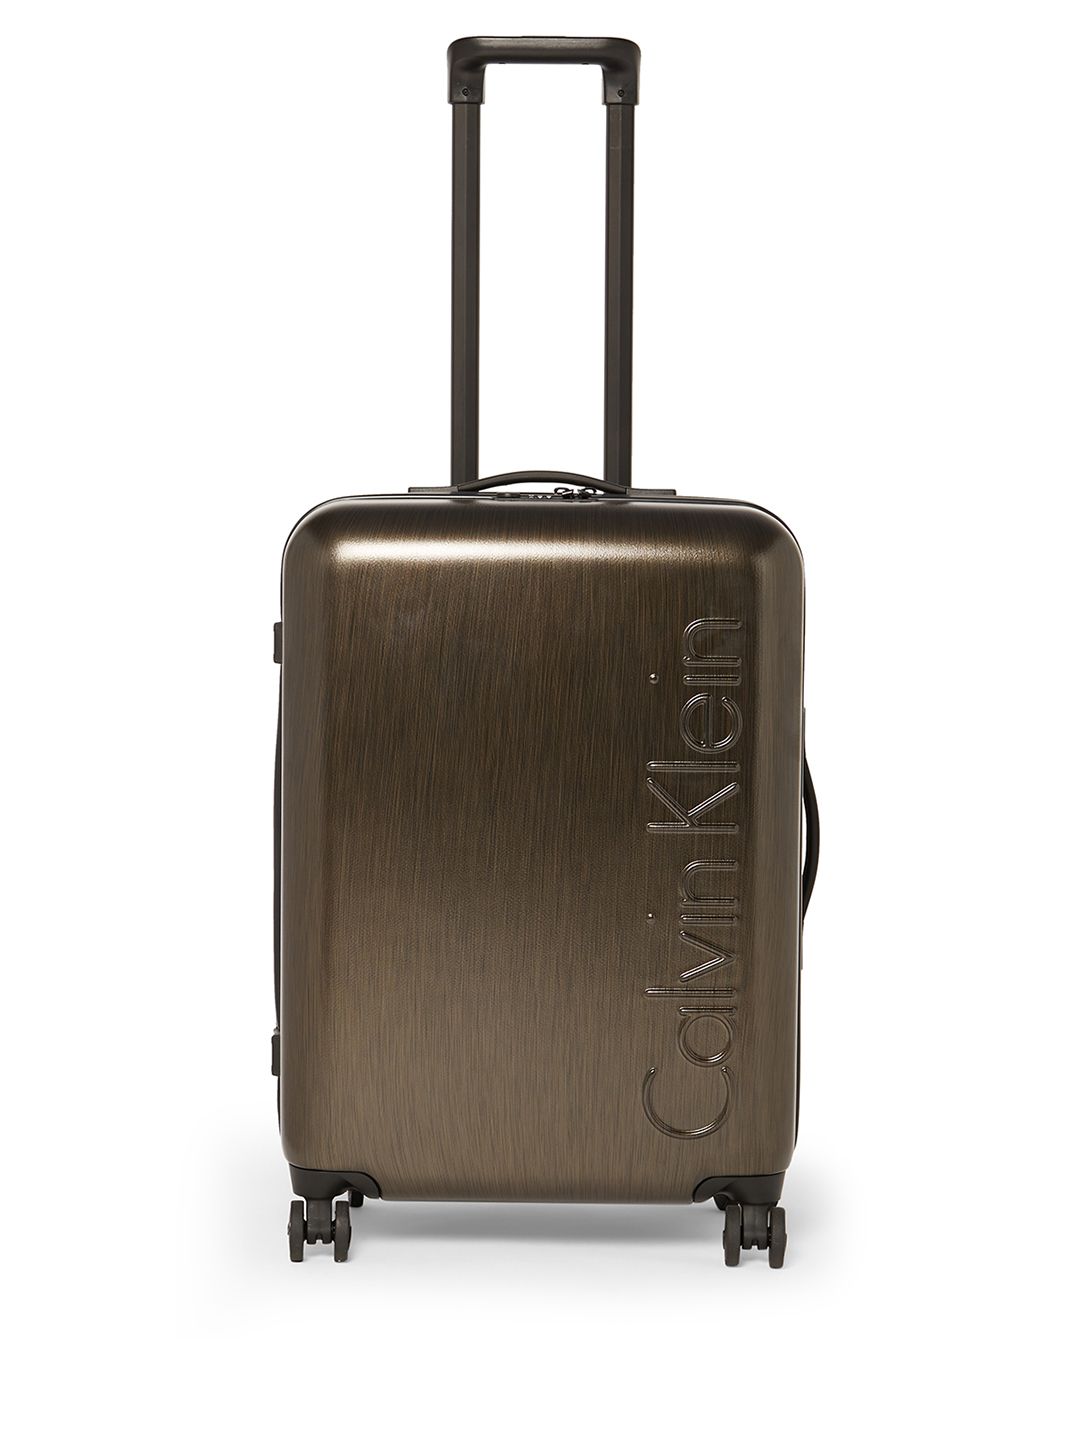 Calvin Klein Bronze Solid South Hampton Hard-Sided Medium Trolley Suitcase Price in India